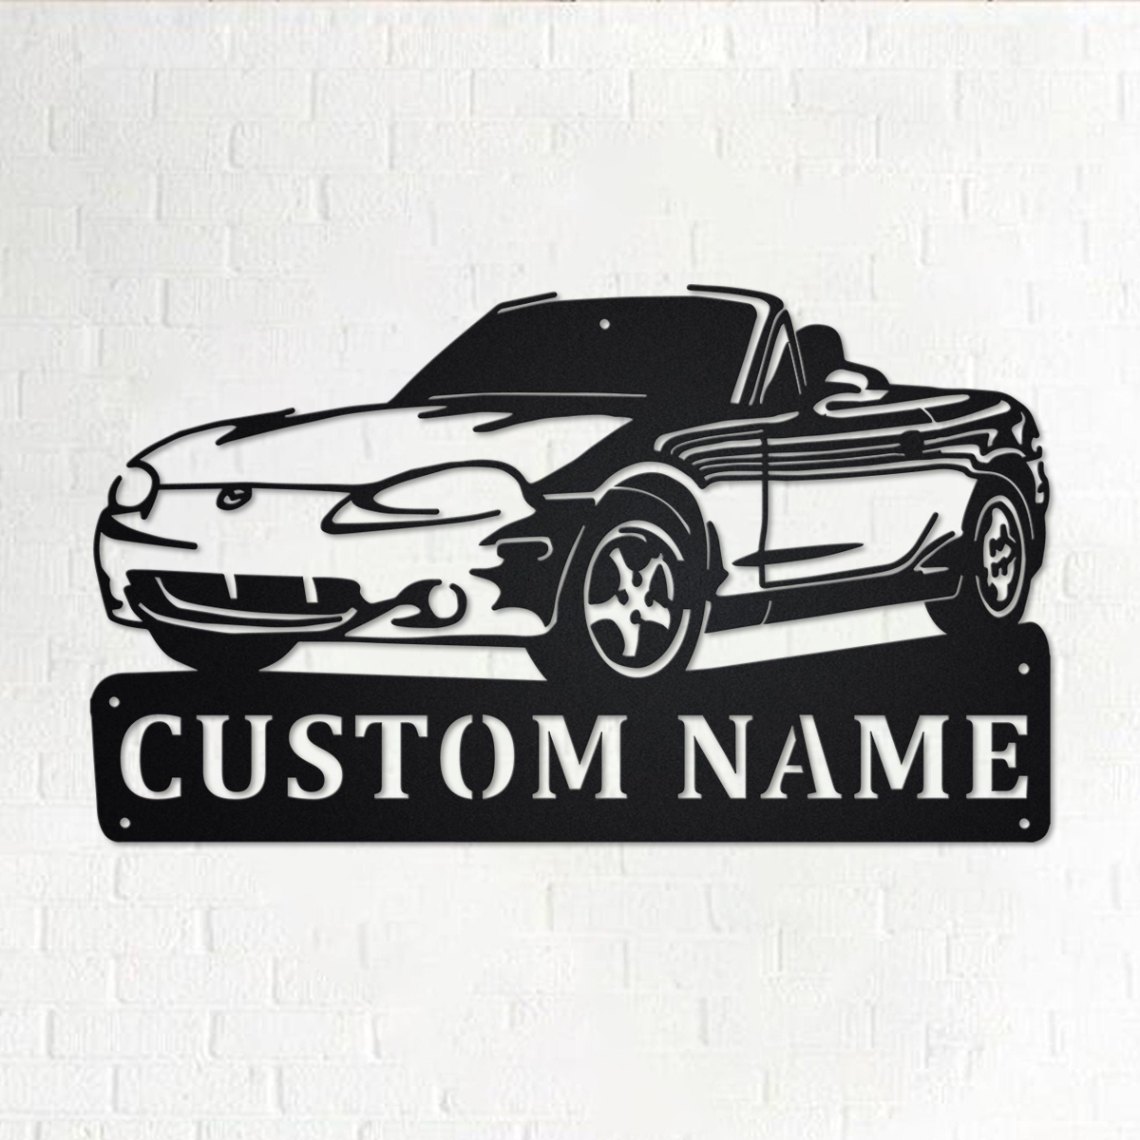 Custom Car Sports Metal Wall Art, Personalized Car Sports Name Sign Decoration For Room, Car Sports Metal Home Decor, Custom Car Sports